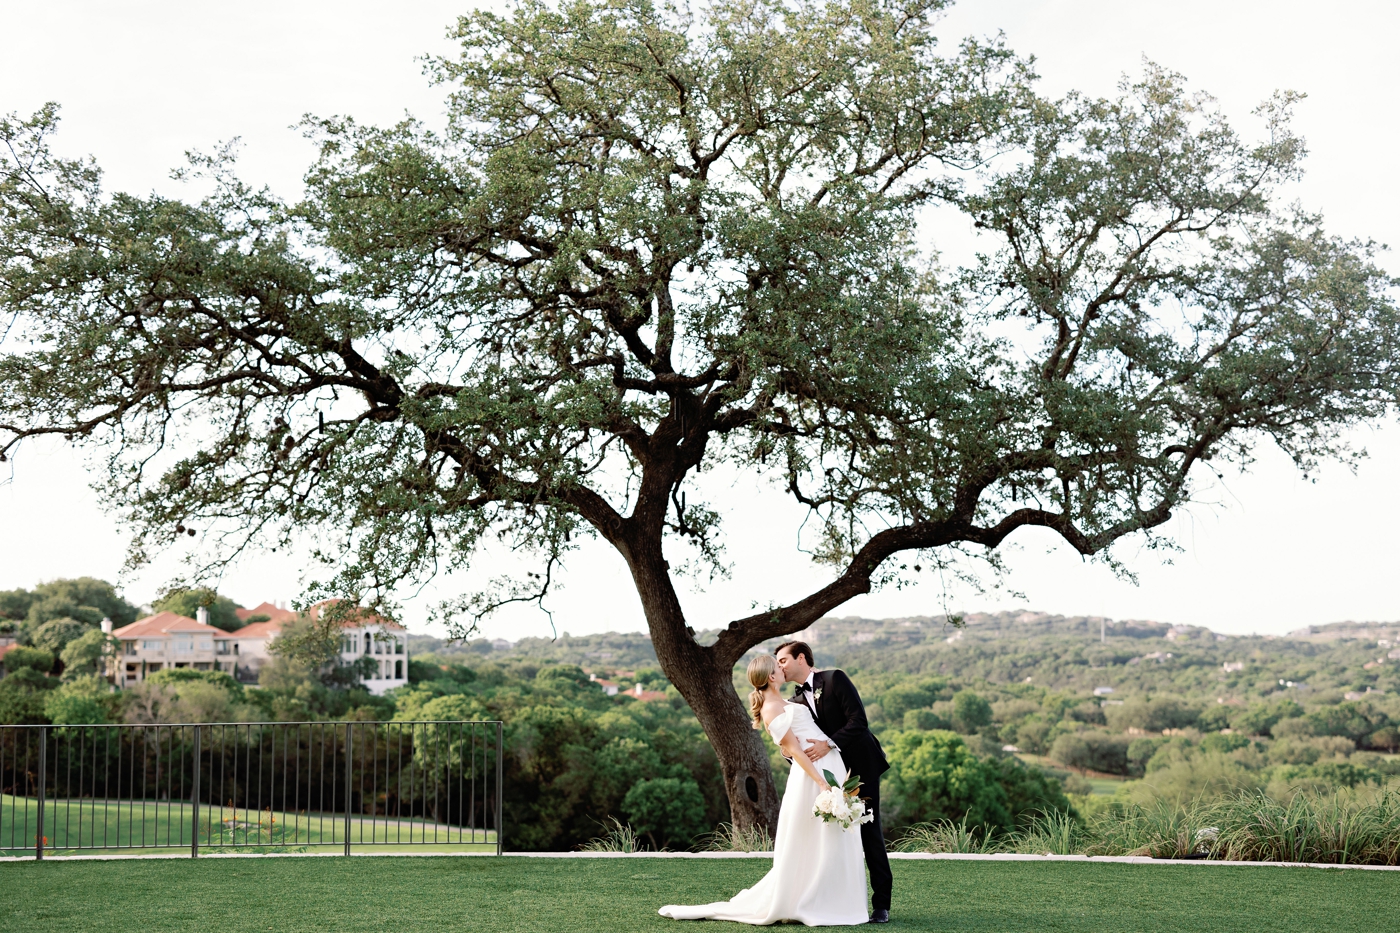 Golden hour bride and groom pictures on the lawn at Omni Barton Creek